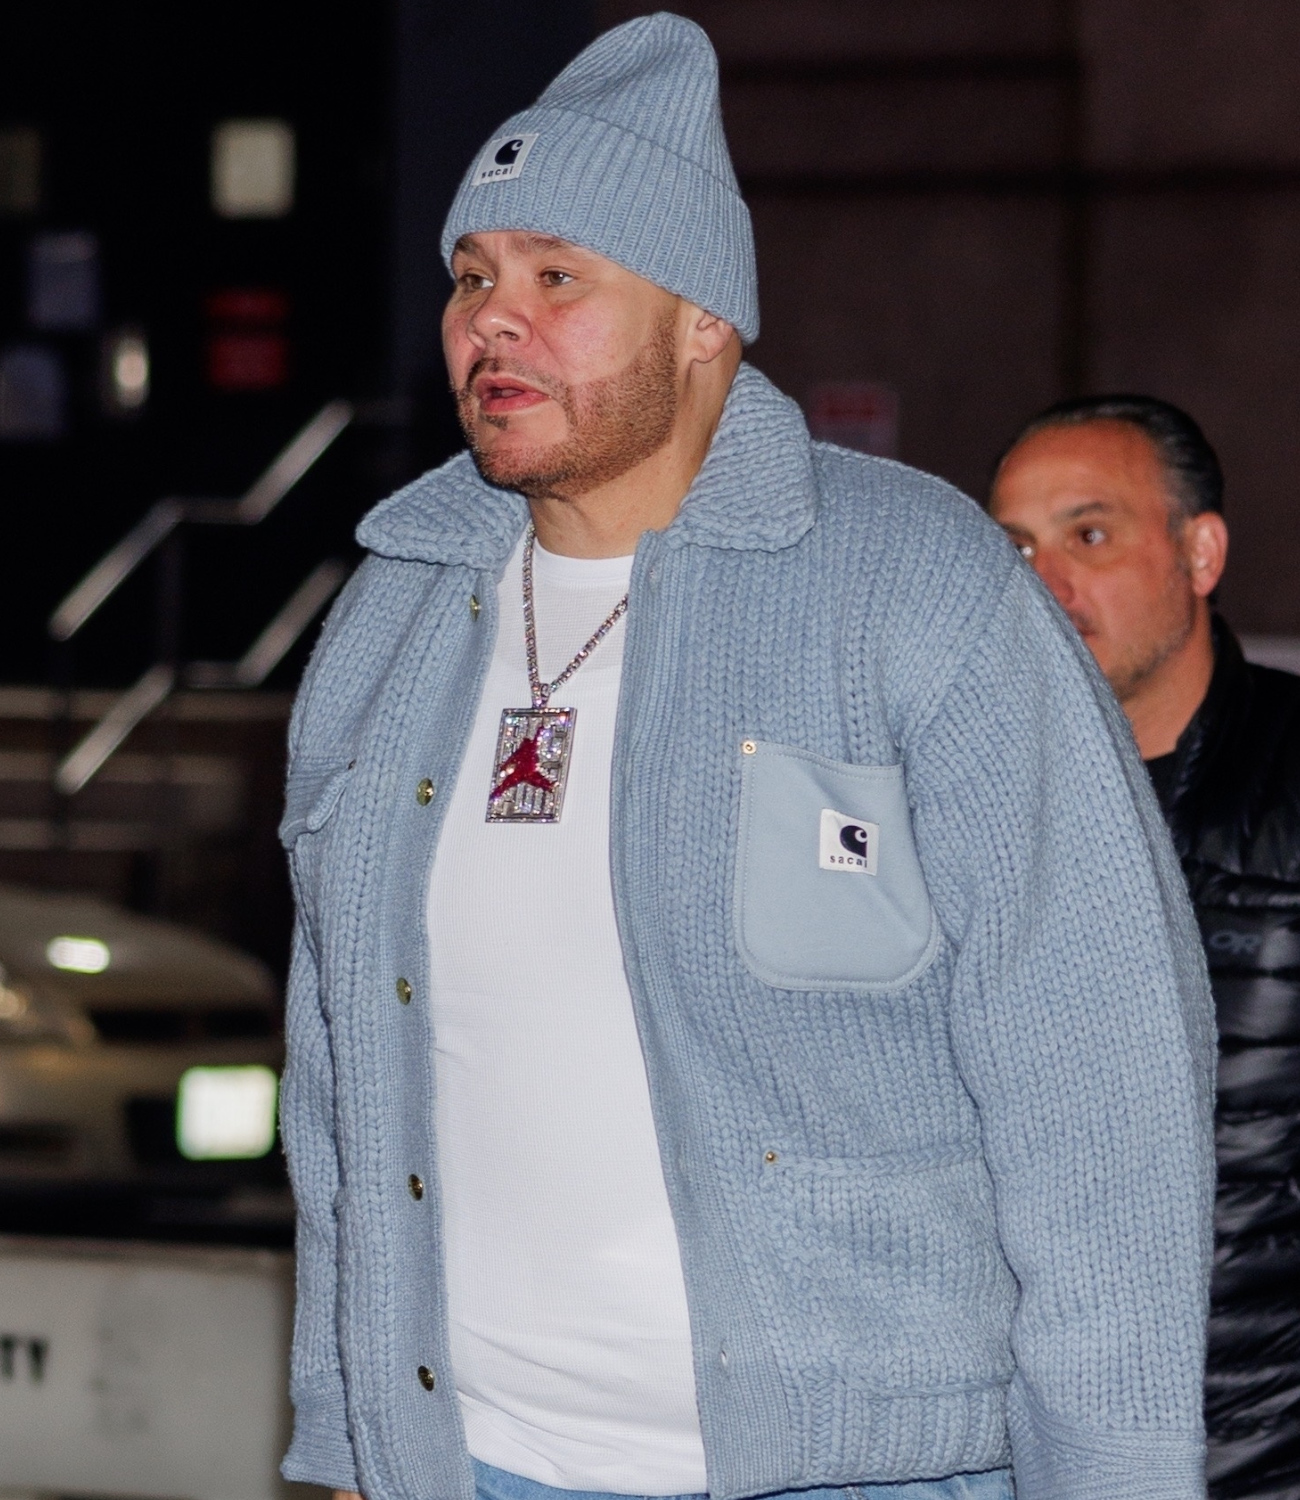 Fat Joe is seen arriving at the New York Knicks vs. Cleveland Cavaliers game at Madison Square Garden in New York City.